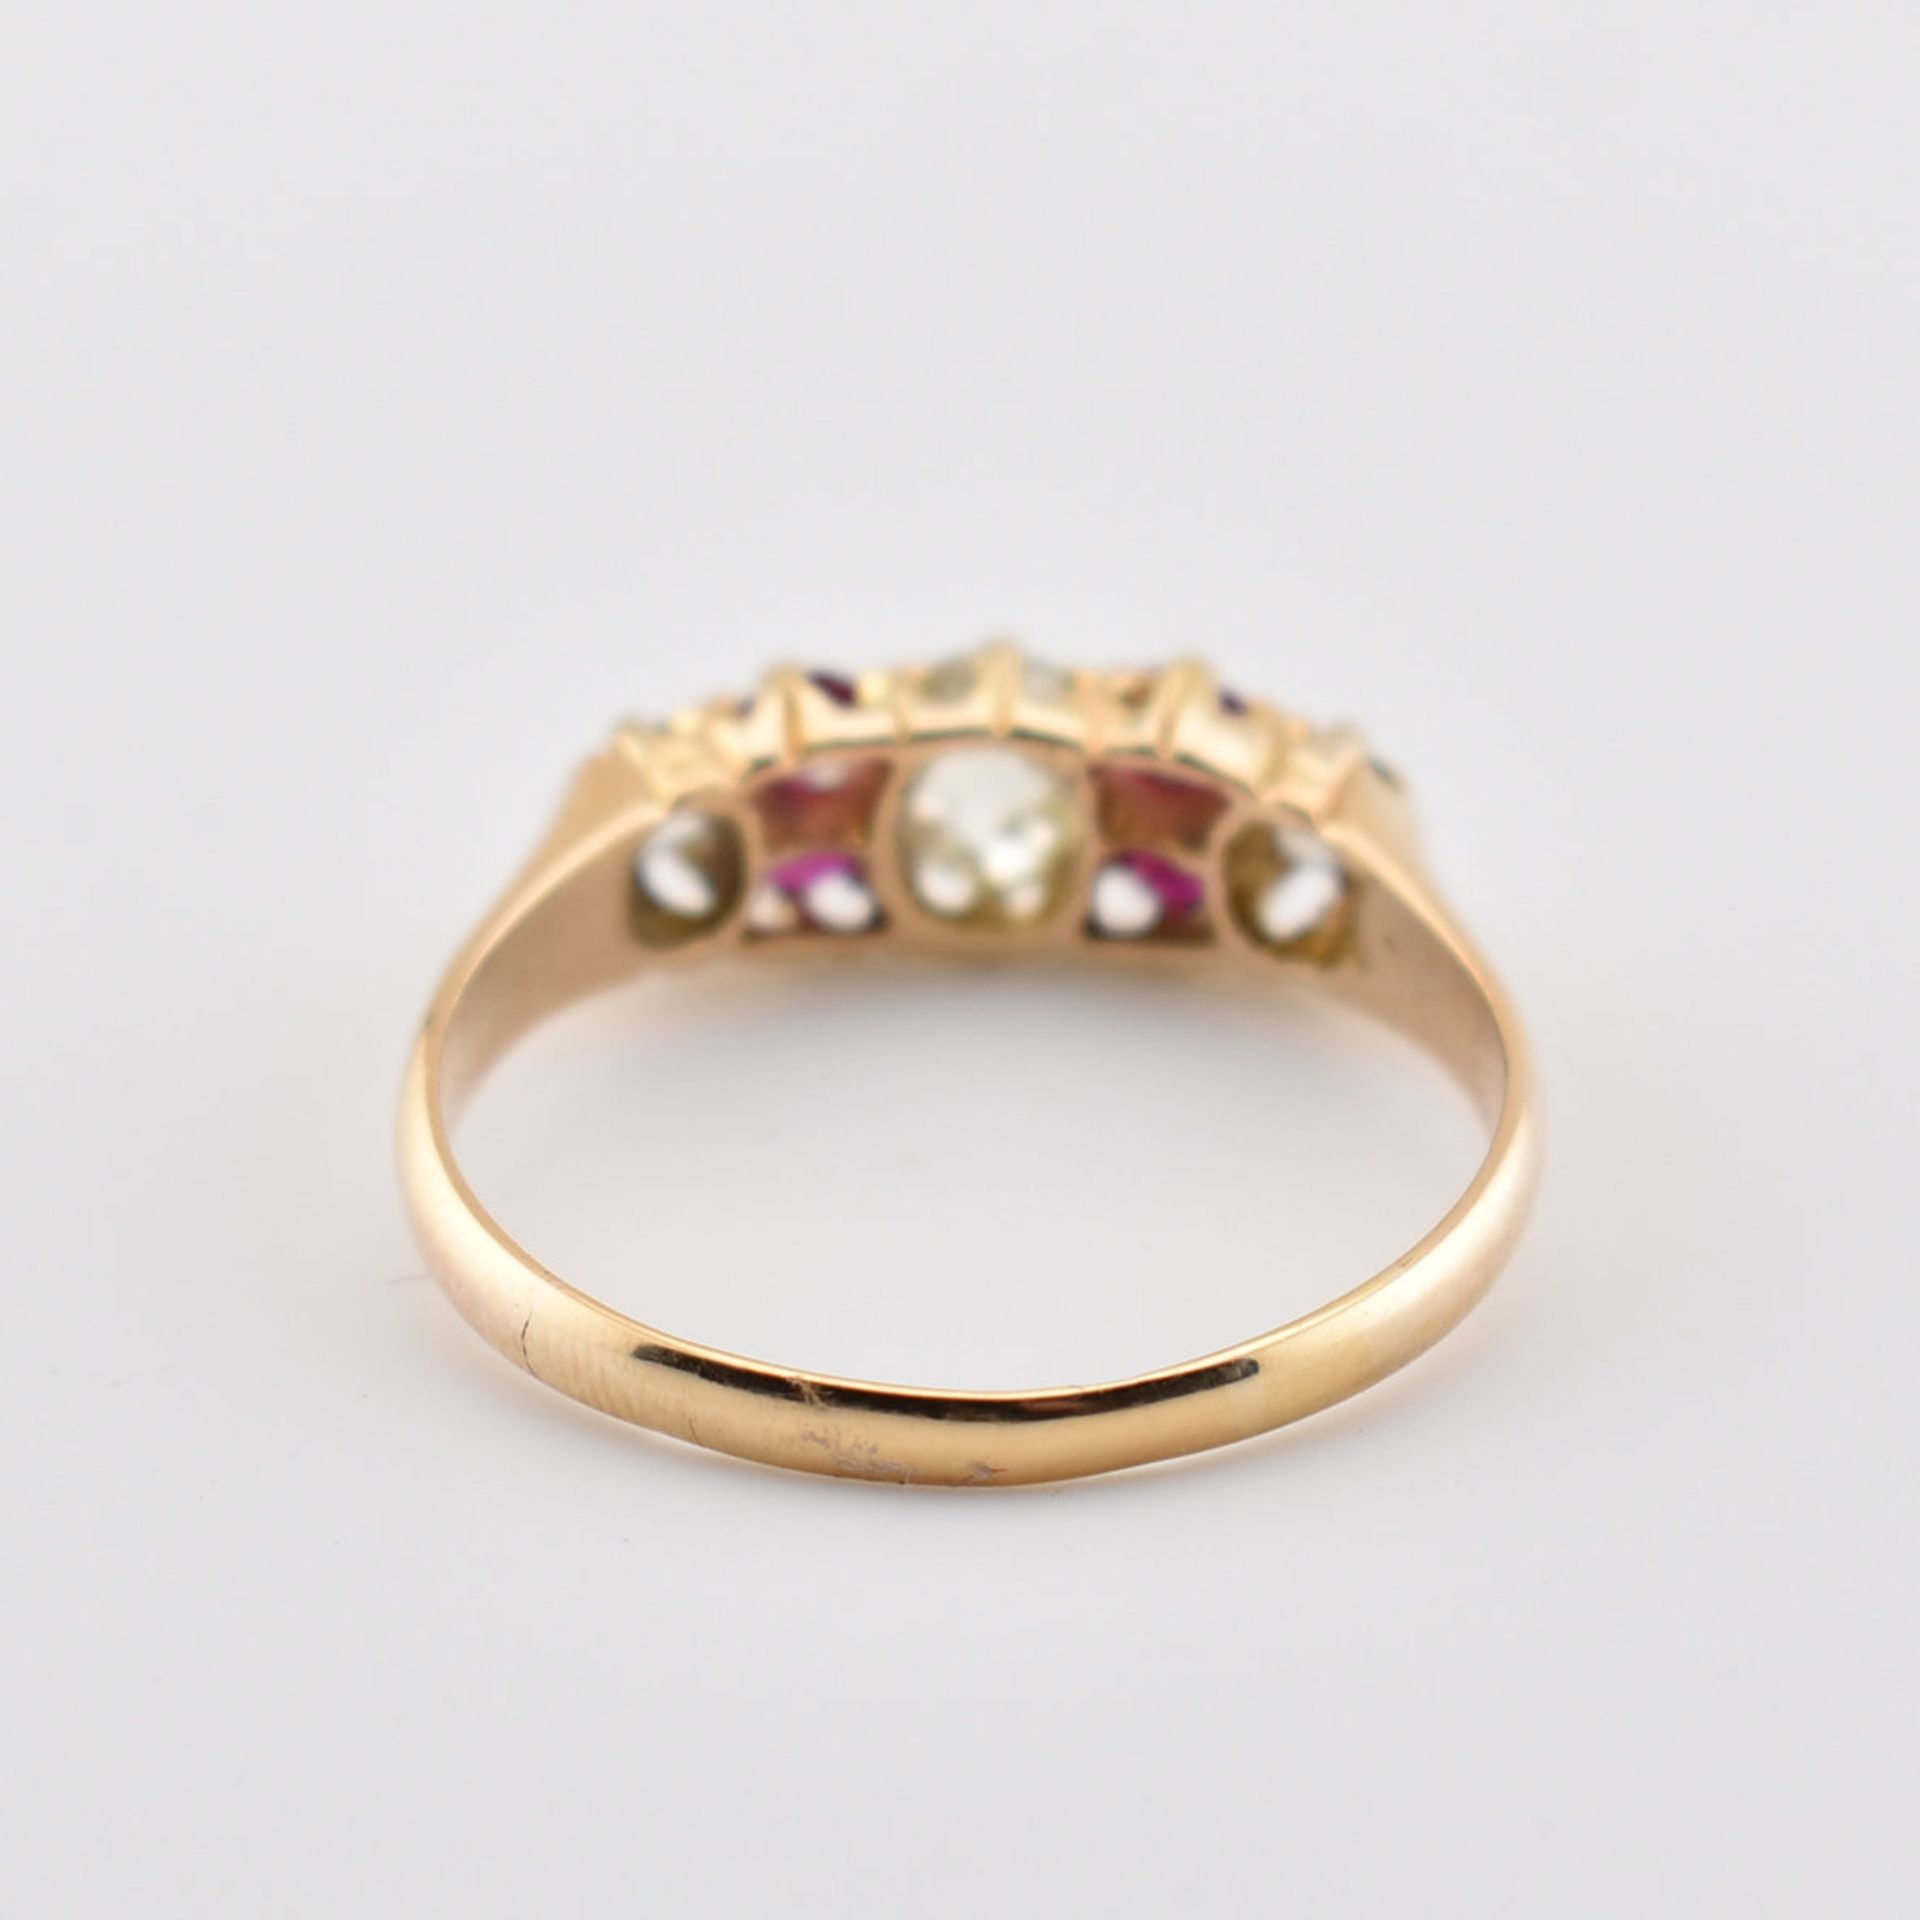 VICTORIAN HALLMARKED 18CT GOLD DIAMOND & RED STONE RING - Image 6 of 7